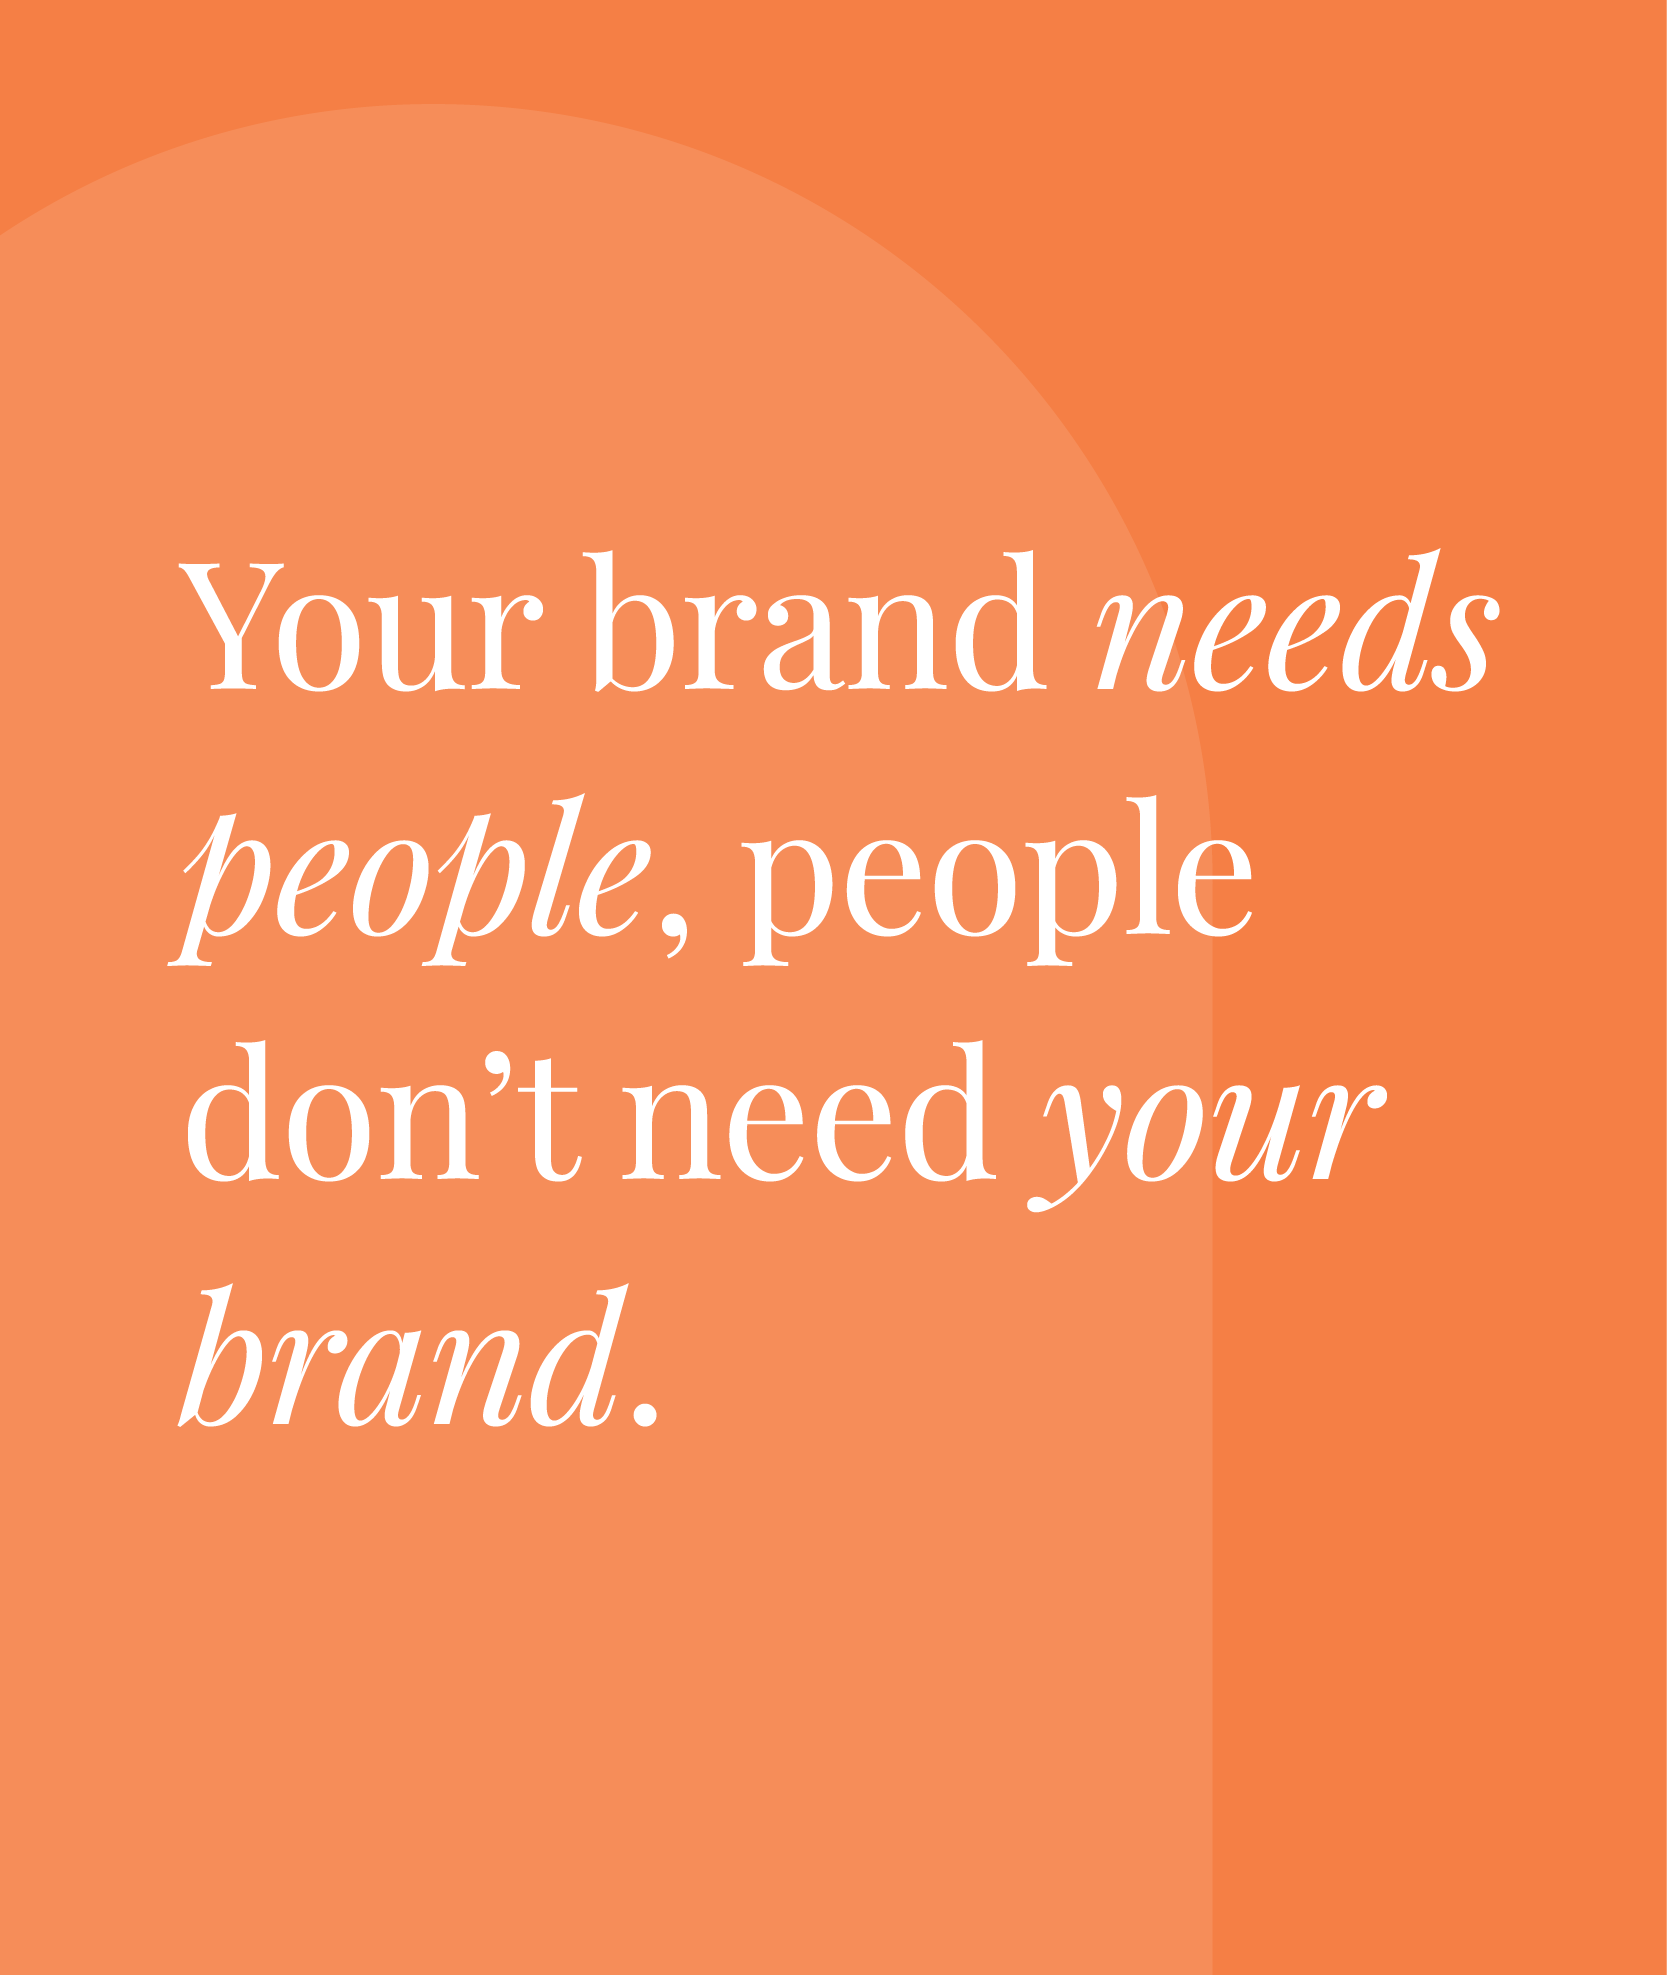 Your brand needs people